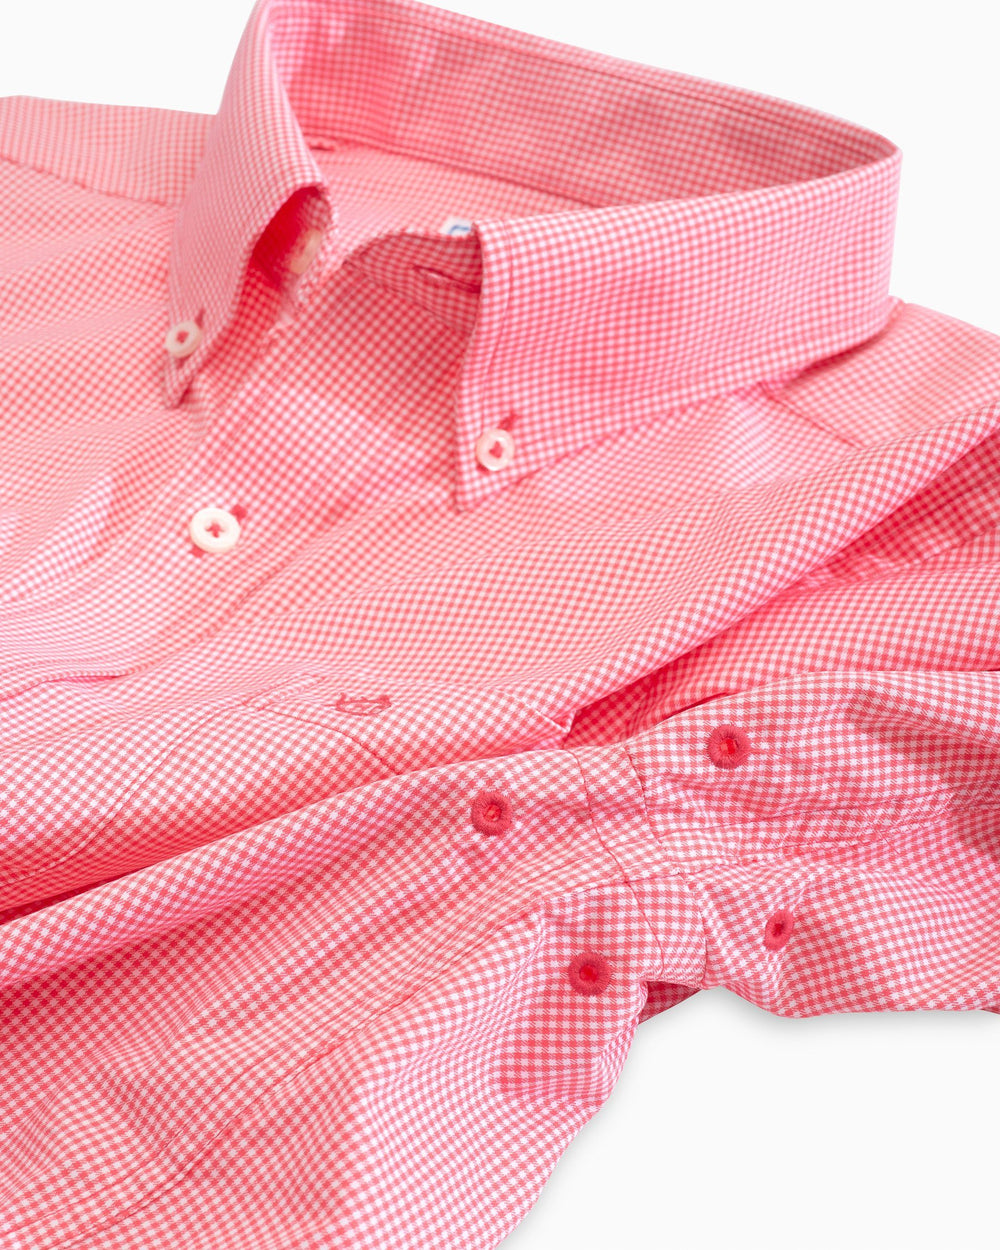 Arm vents of the Men's Pink Micro Gingham Intercoastal Performance Sport Shirt by Southern Tide - Sunkist Coral